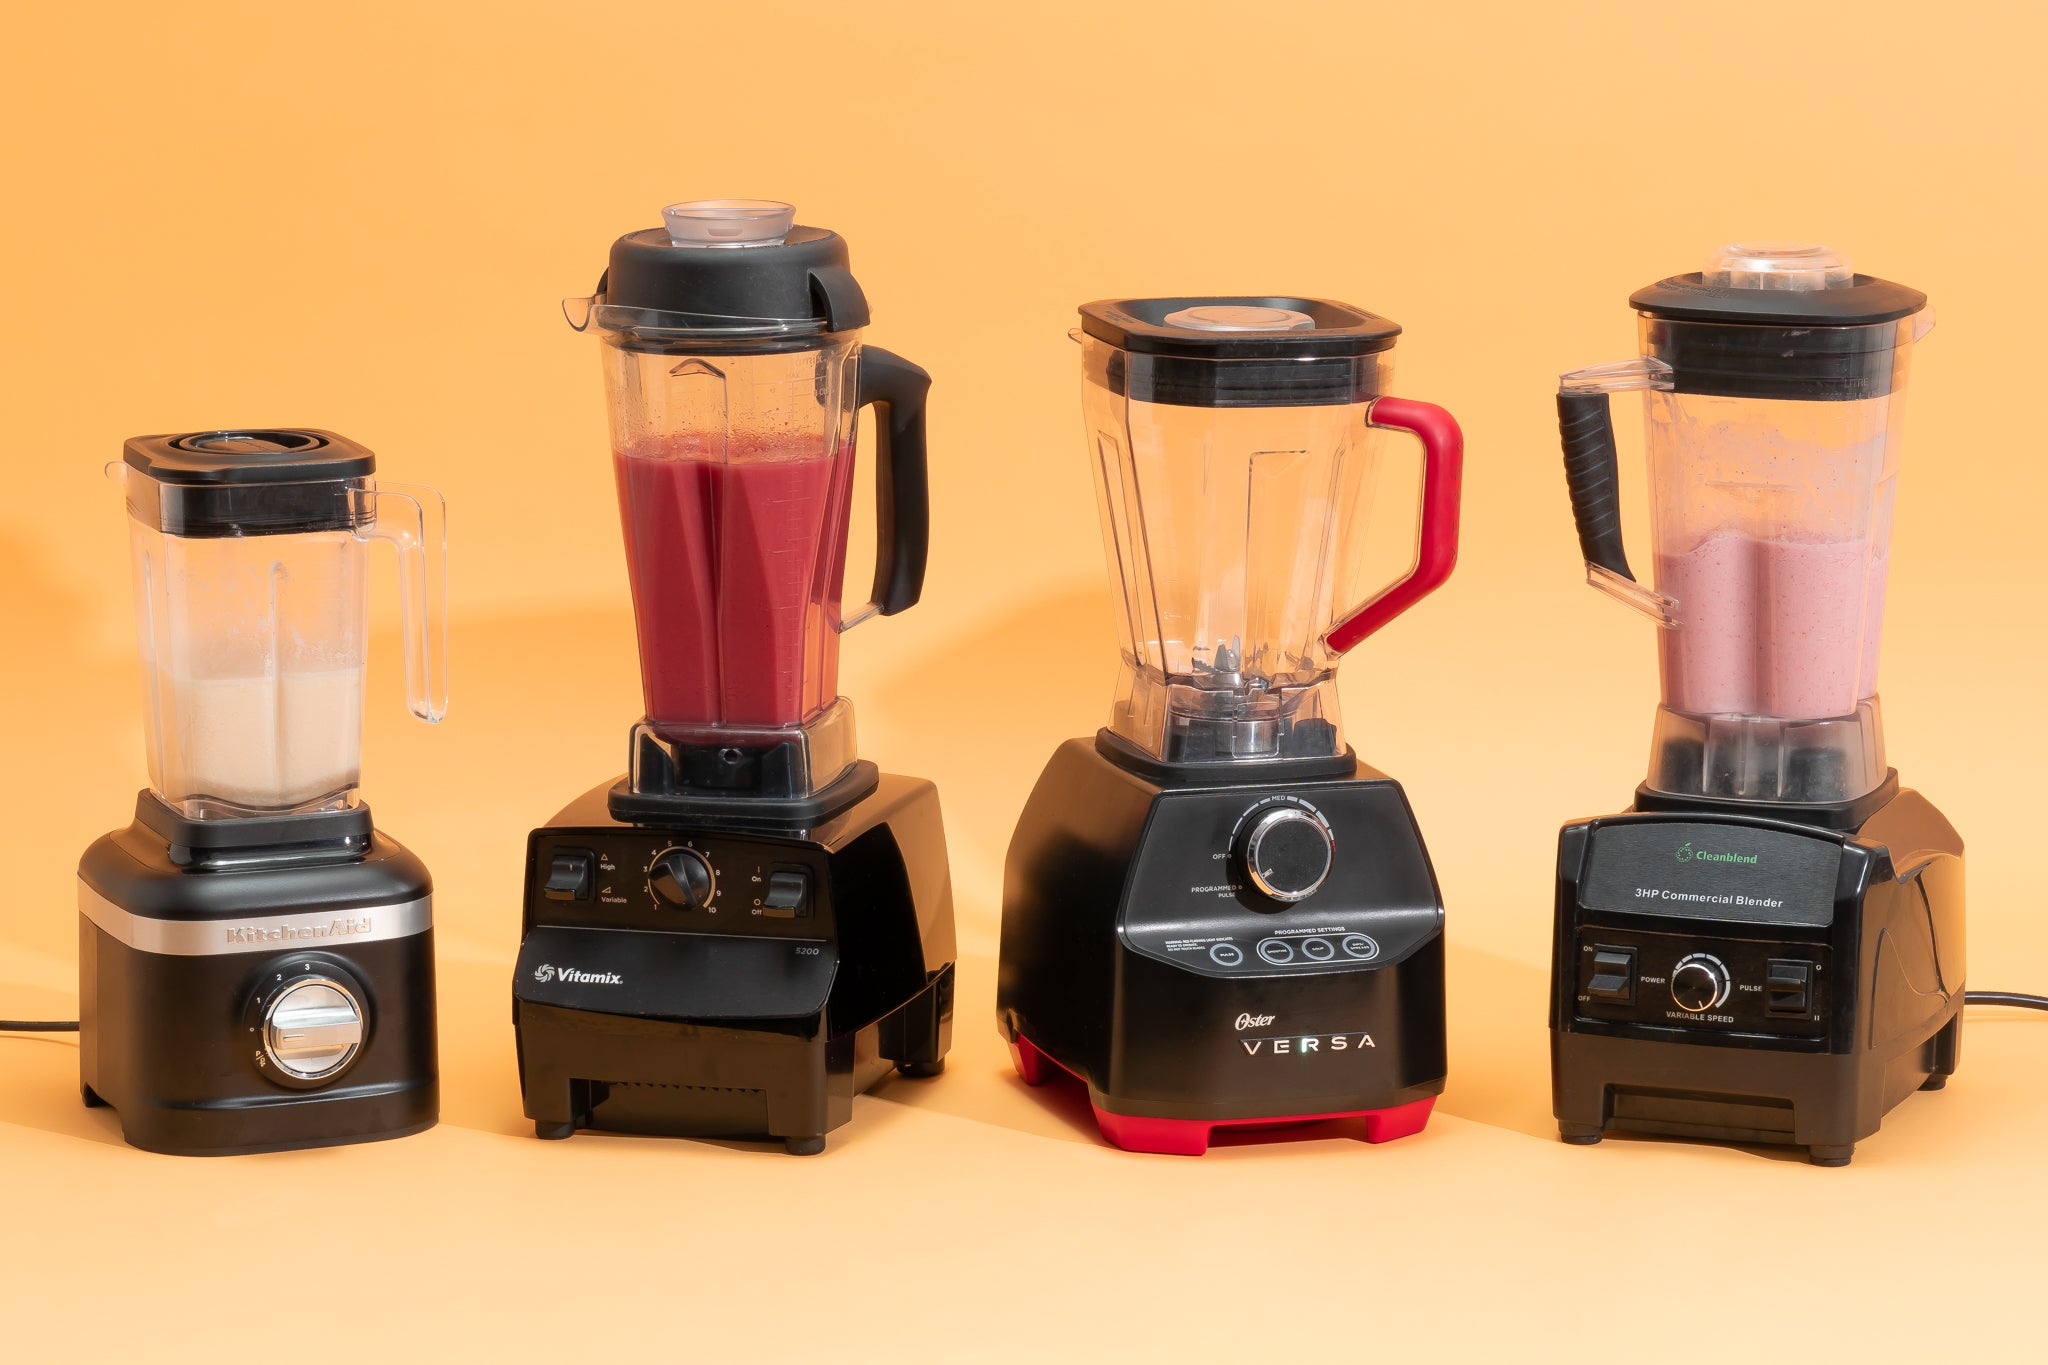 Vitamix Stopped Working Burning Smell: Troubleshooting Tips and Solutions